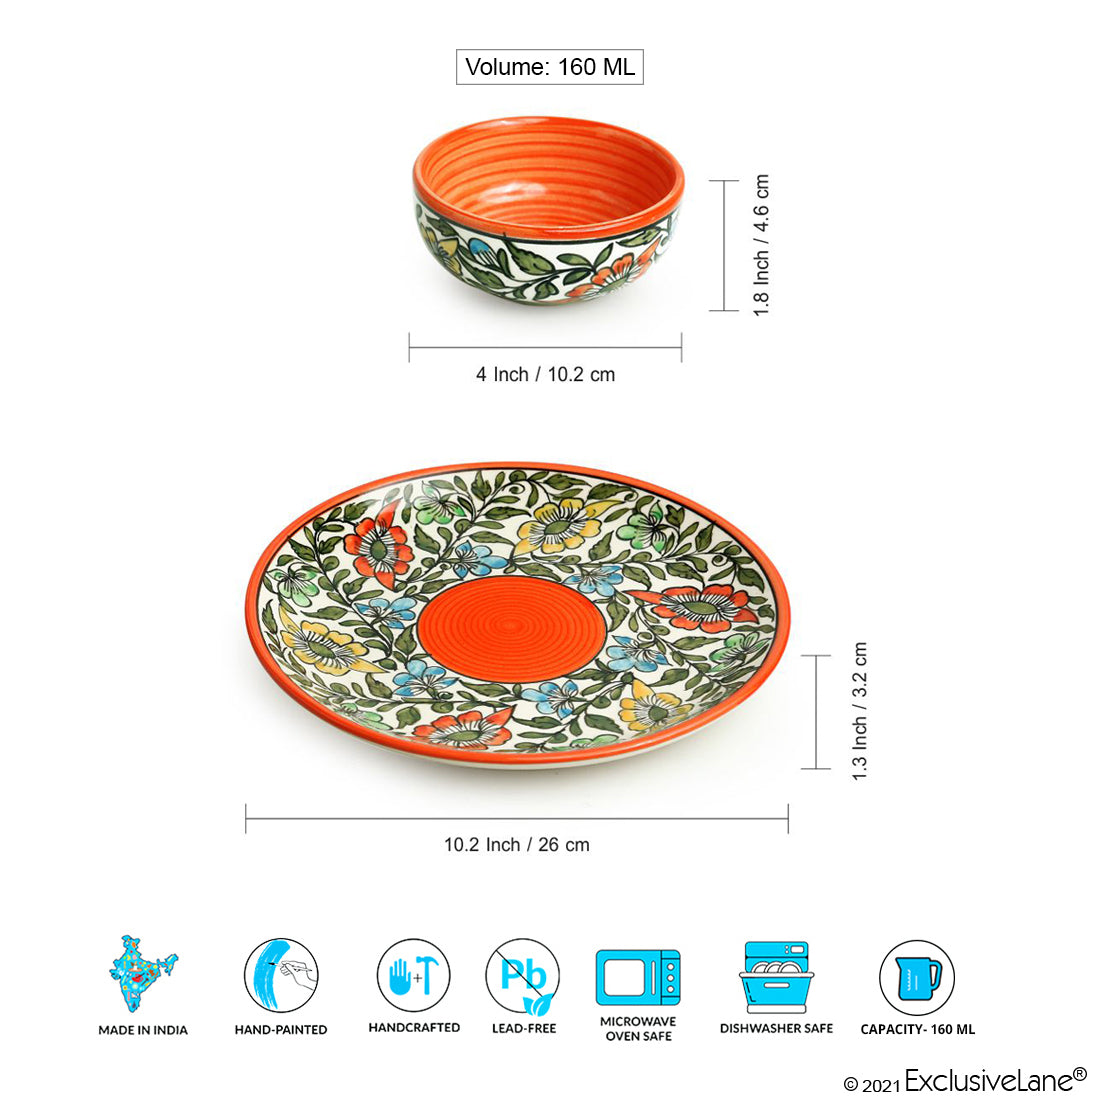 'Mughal Bagheecha' Handpainted Ceramic Dinner Plates With Dinner Katoris (8 Pieces, Serving for 4, Microwave Safe)